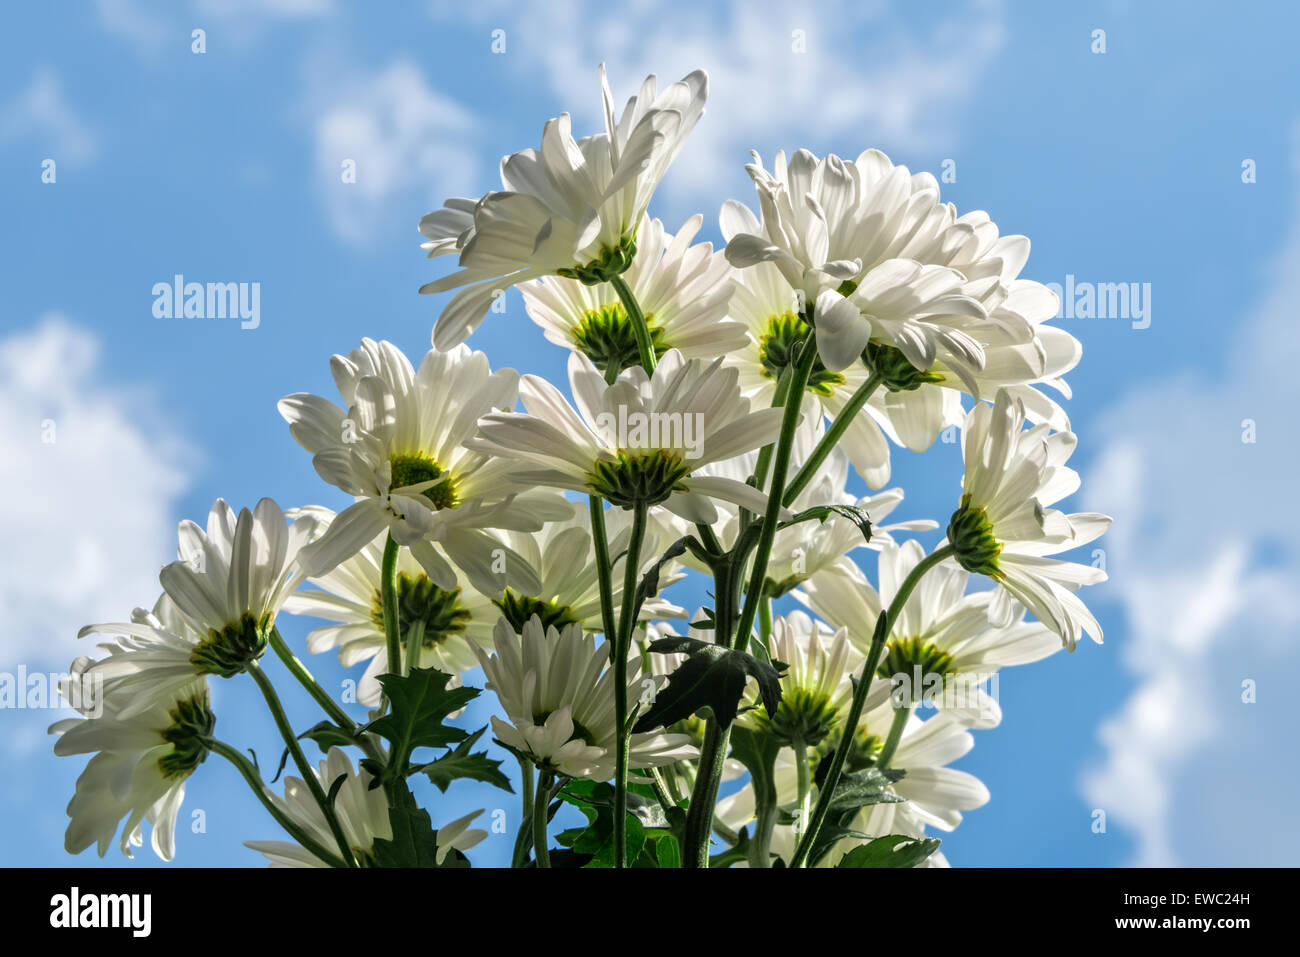 Bouquet of freshly cut daisies against a blue sky Stock Photo